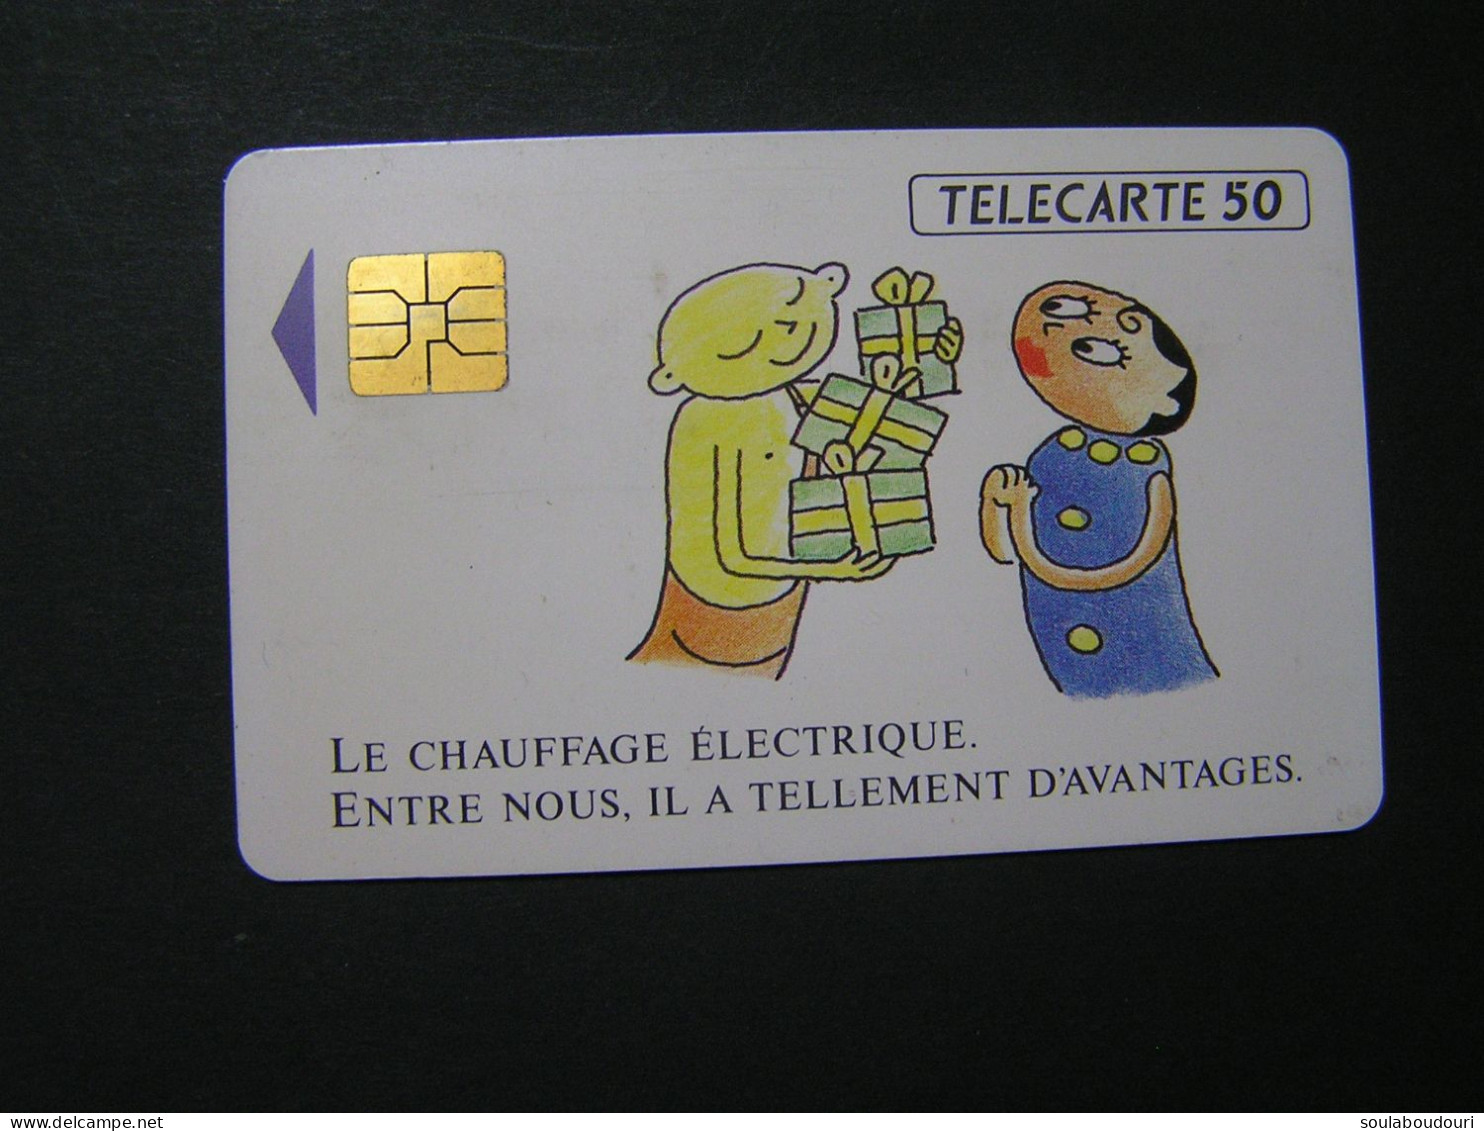 FRANCE Phonecards Private Tirage  11.200 Ex 02/92.... - 50 Units